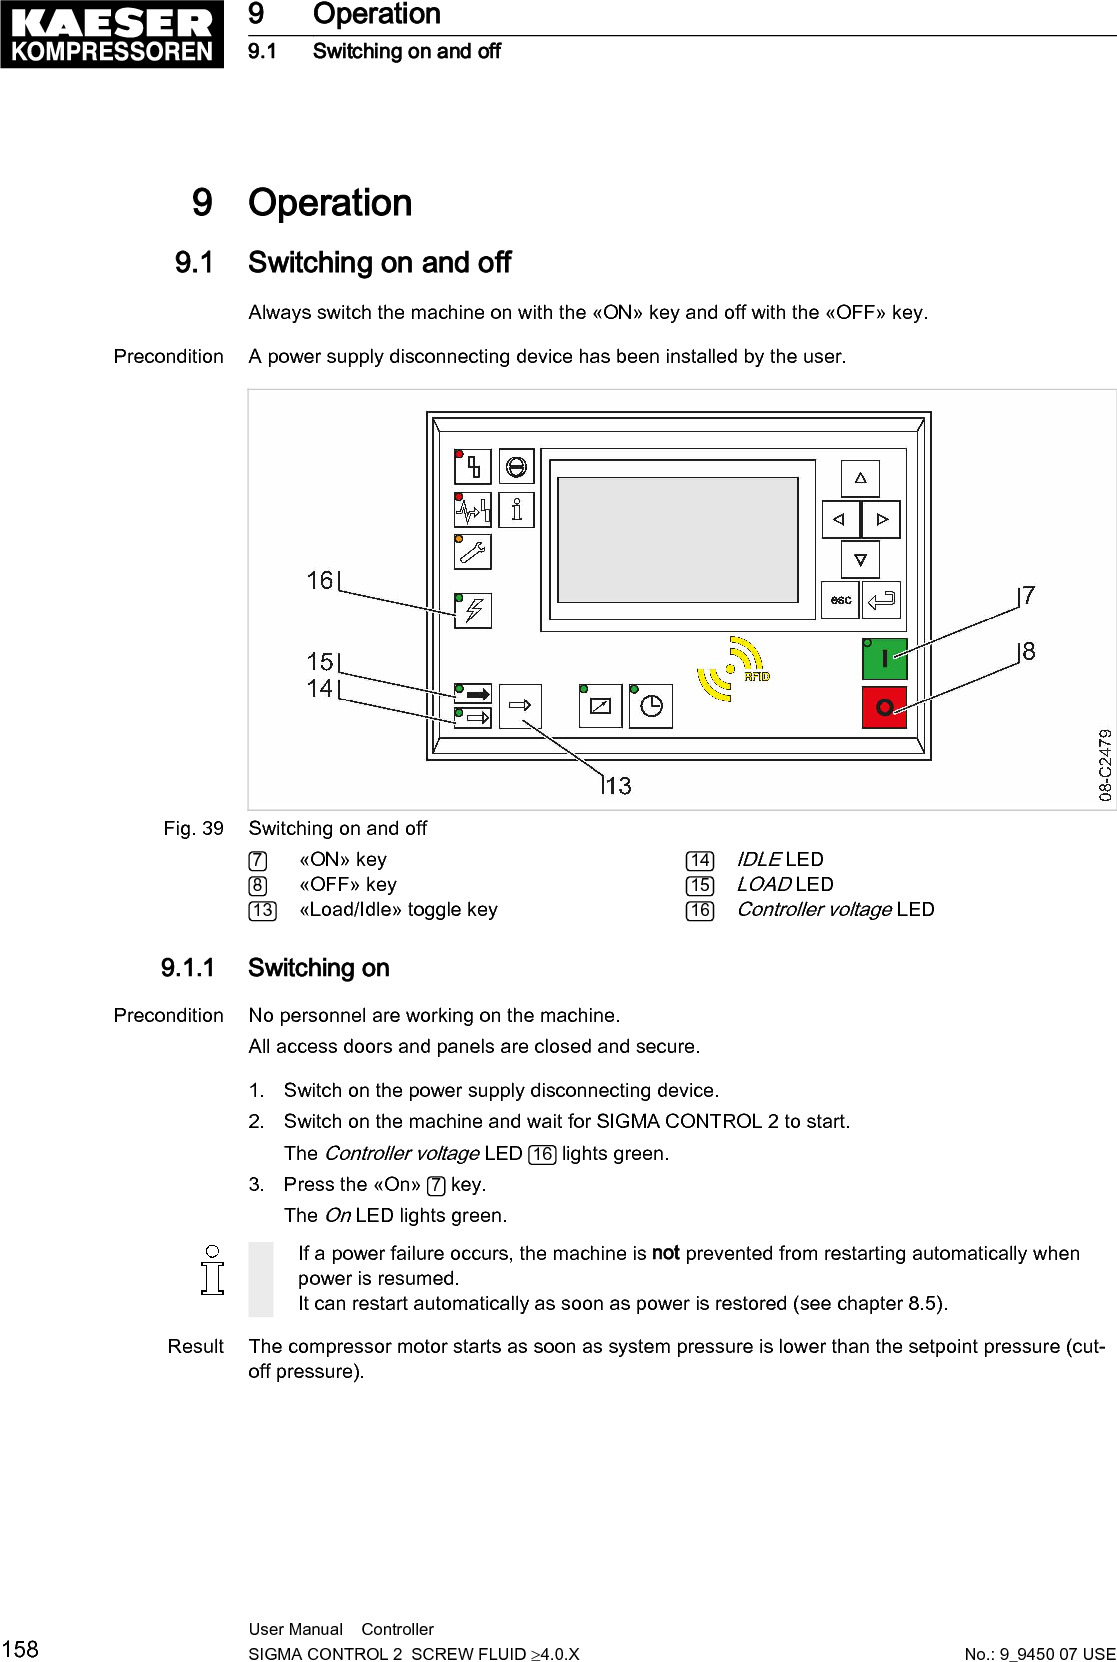 9  Operation9.1  Switching on and offAlways switch the machine on with the «ON» key and off with the «OFF» key.Precondition A power supply disconnecting device has been installed by the user.Fig. 39 Switching on and off7«ON» key8«OFF» key13 «Load/Idle» toggle key14IDLE LED15LOAD LED16Controller voltage LED9.1.1  Switching onPrecondition No personnel are working on the machine.All access doors and panels are closed and secure.1. Switch on the power supply disconnecting device.2. Switch on the machine and wait for SIGMA CONTROL 2 to start.The Controller voltage LED  16  lights green.3. Press the «On»  7 key.The On LED lights green.If a power failure occurs, the machine is not prevented from restarting automatically whenpower is resumed.It can restart automatically as soon as power is restored (see chapter 8.5).Result The compressor motor starts as soon as system pressure is lower than the setpoint pressure (cut‐off pressure).9 Operation9.1 Switching on and off158 User Manual    Controller  SIGMA CONTROL 2  SCREW FLUID ≥4.0.X No.: 9_9450 07 USE